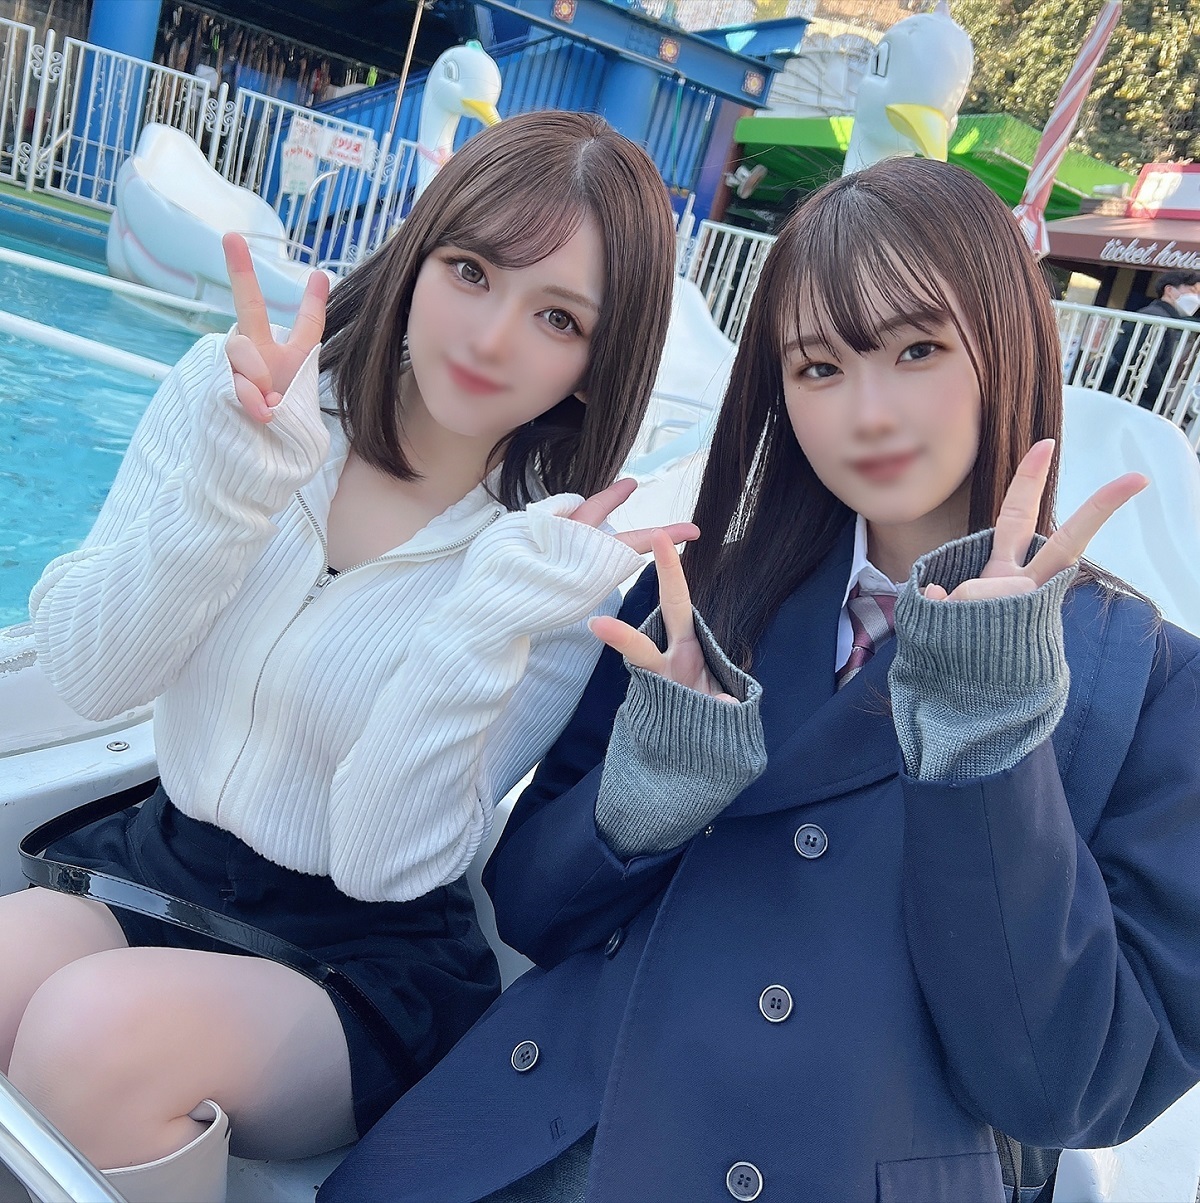 [FC2PPV.net / FC2.com] Gcup beautiful big breasts who want to be a female announcer ◯ A female college student and an idol gemstone beauty found in the Southern Alps ◯ A woman... The pleasure of holding these two at the same time was just ]